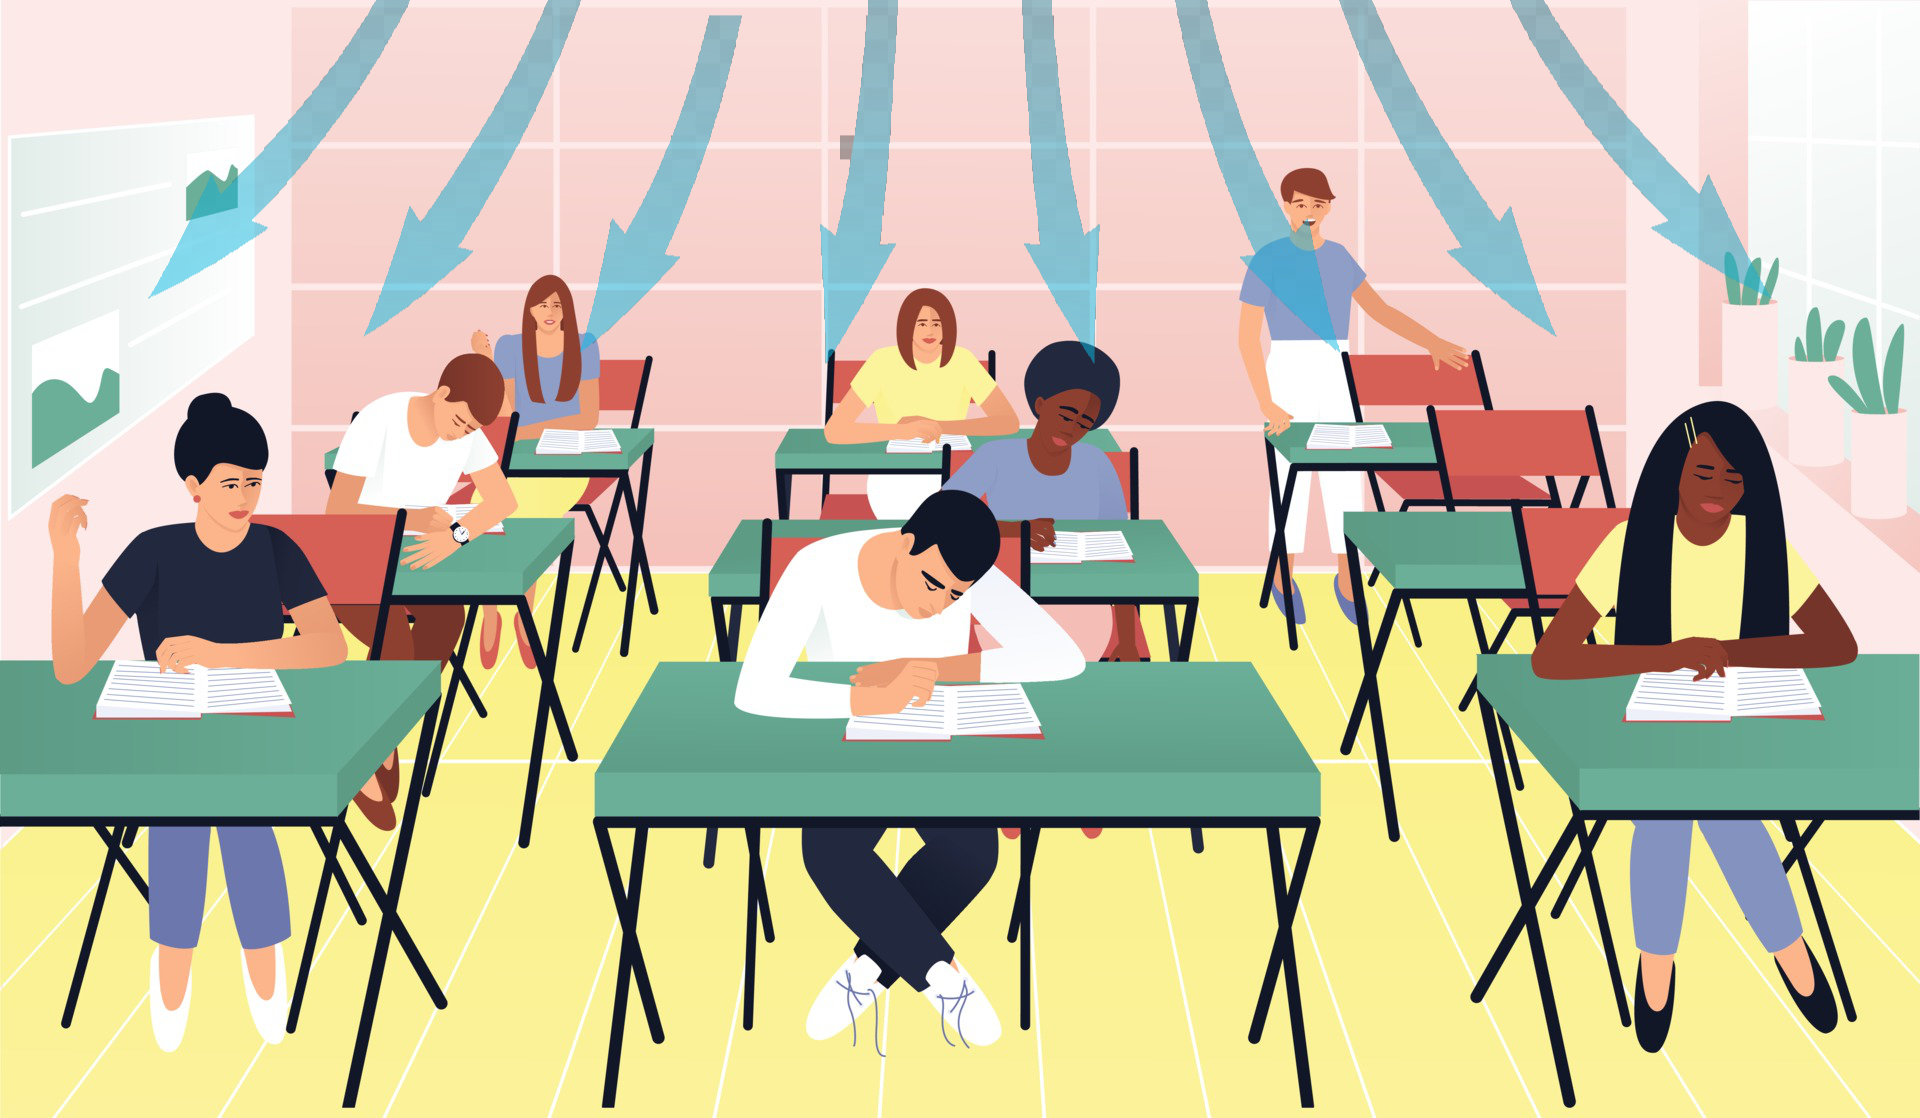 A vector image showing a mixed race classroom being ventilated